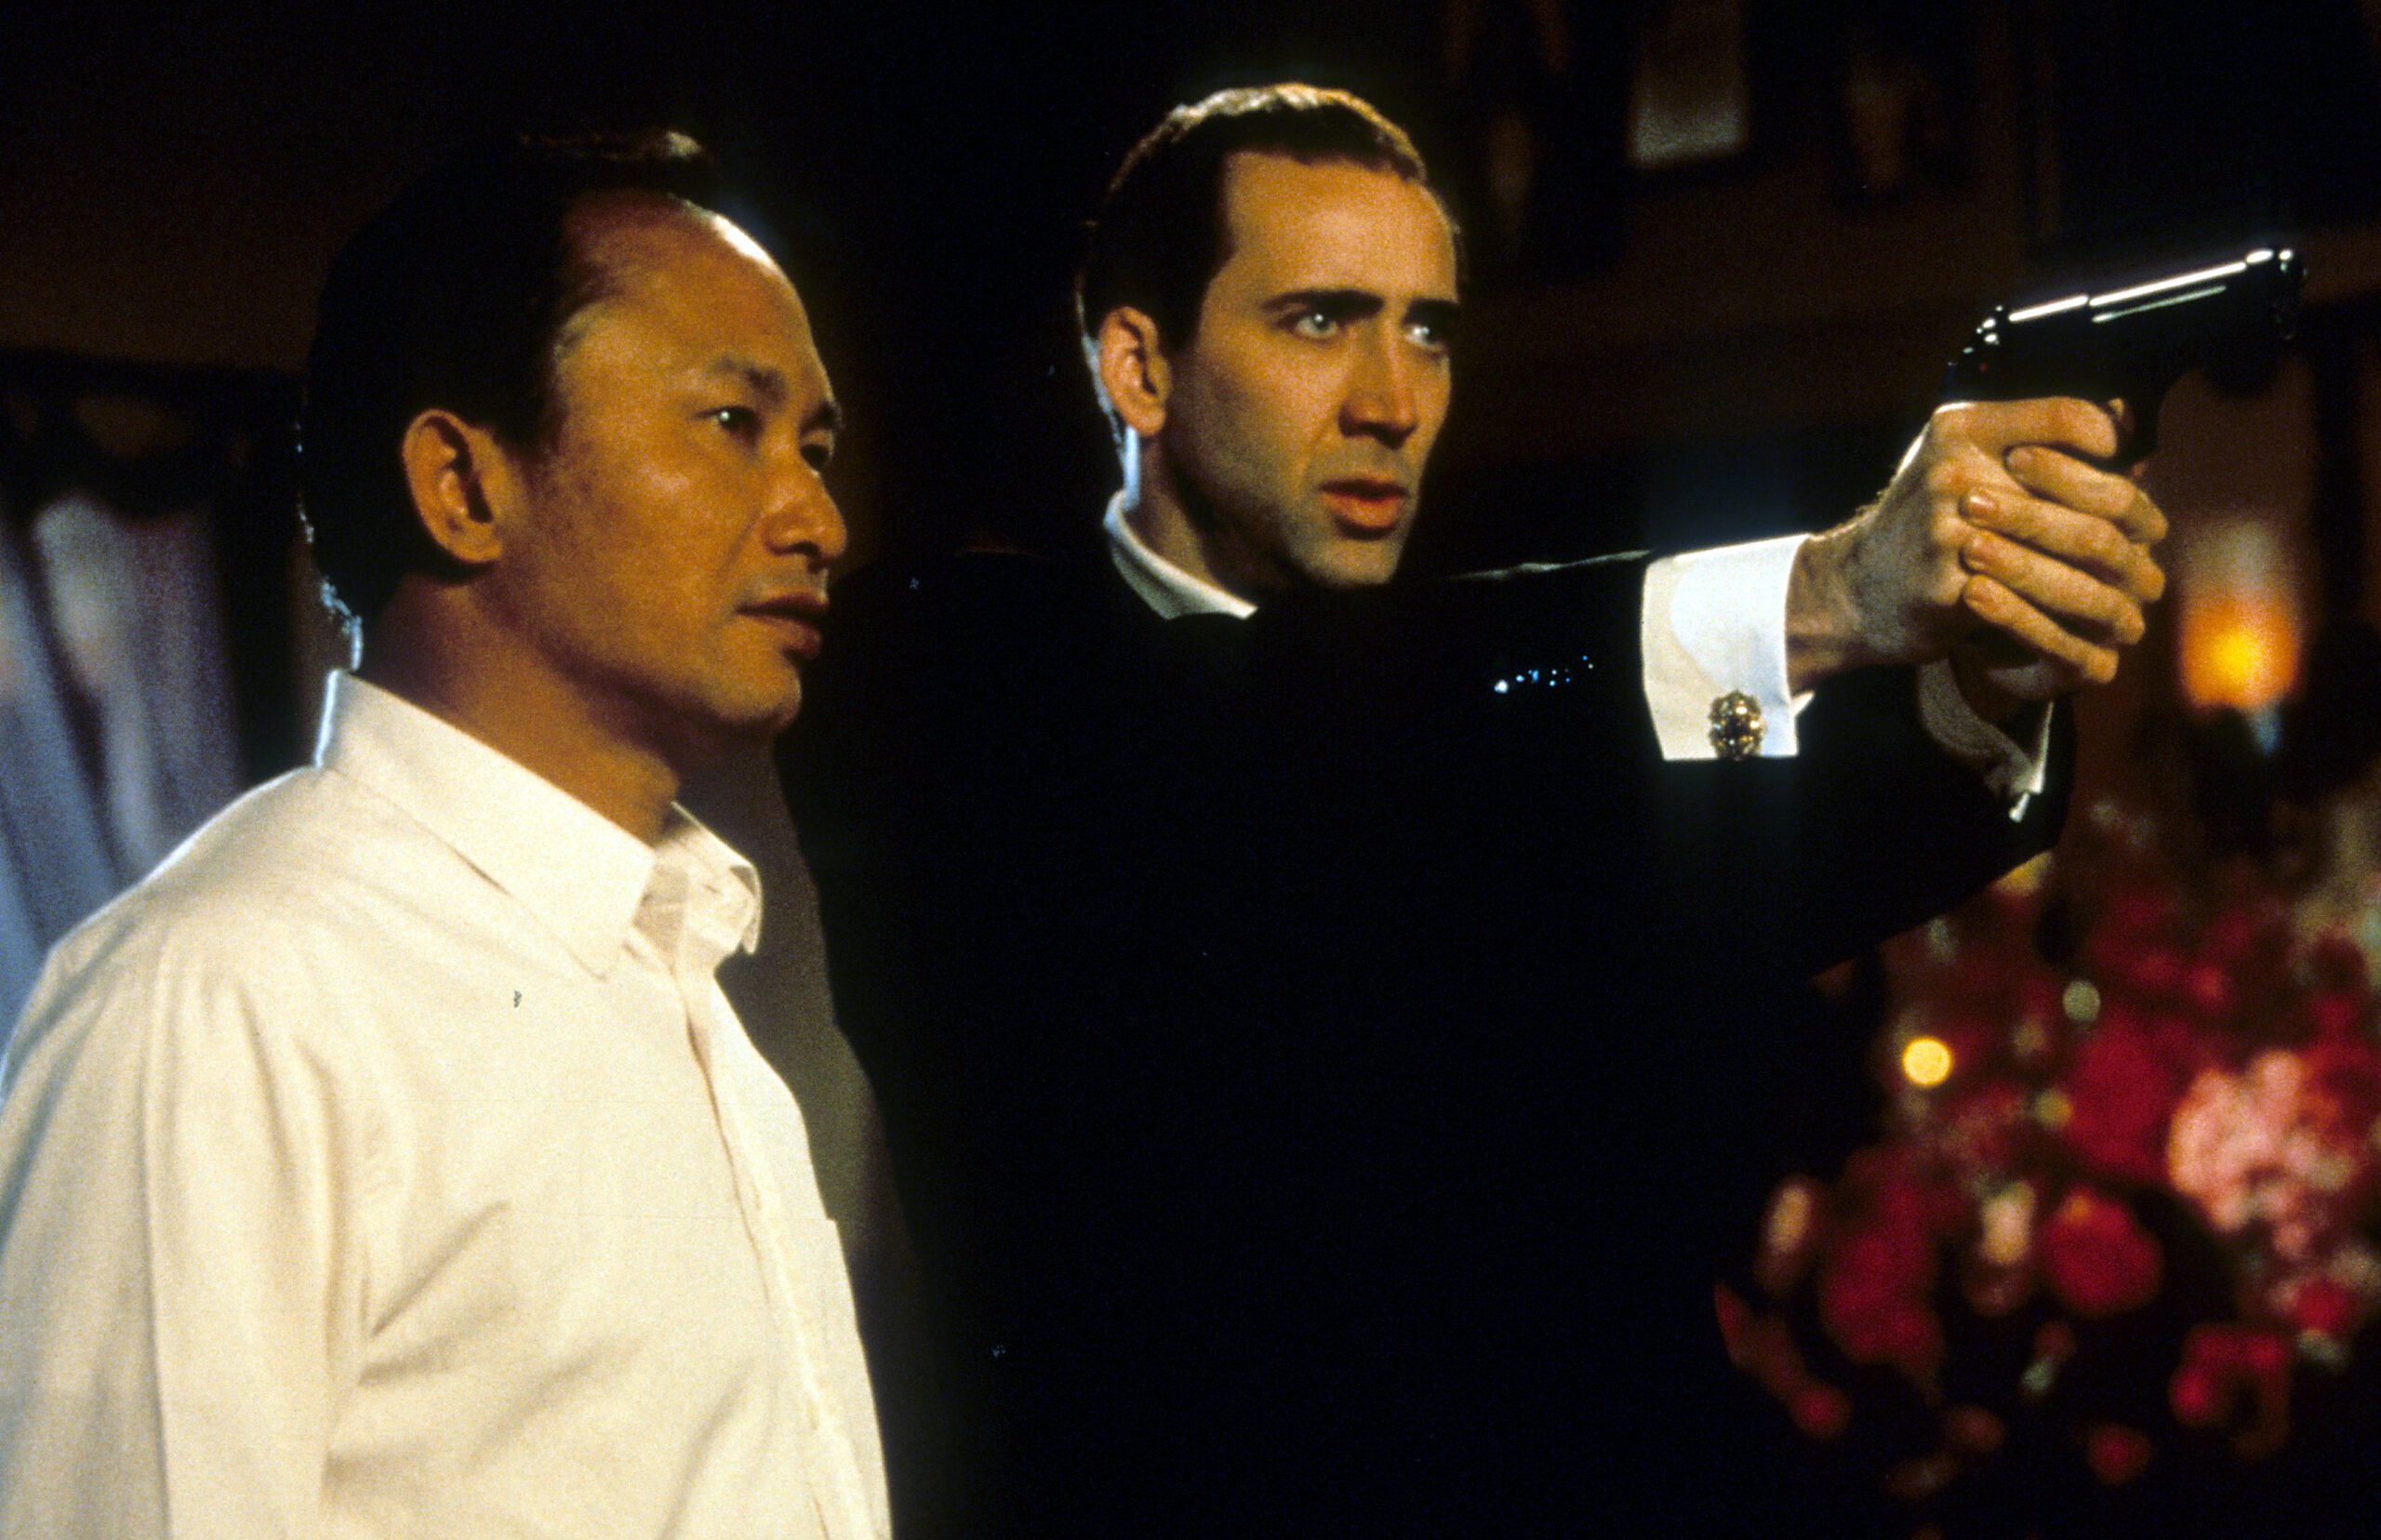 Director John Woo watches as Nicolas Cage during filming of Face/Off